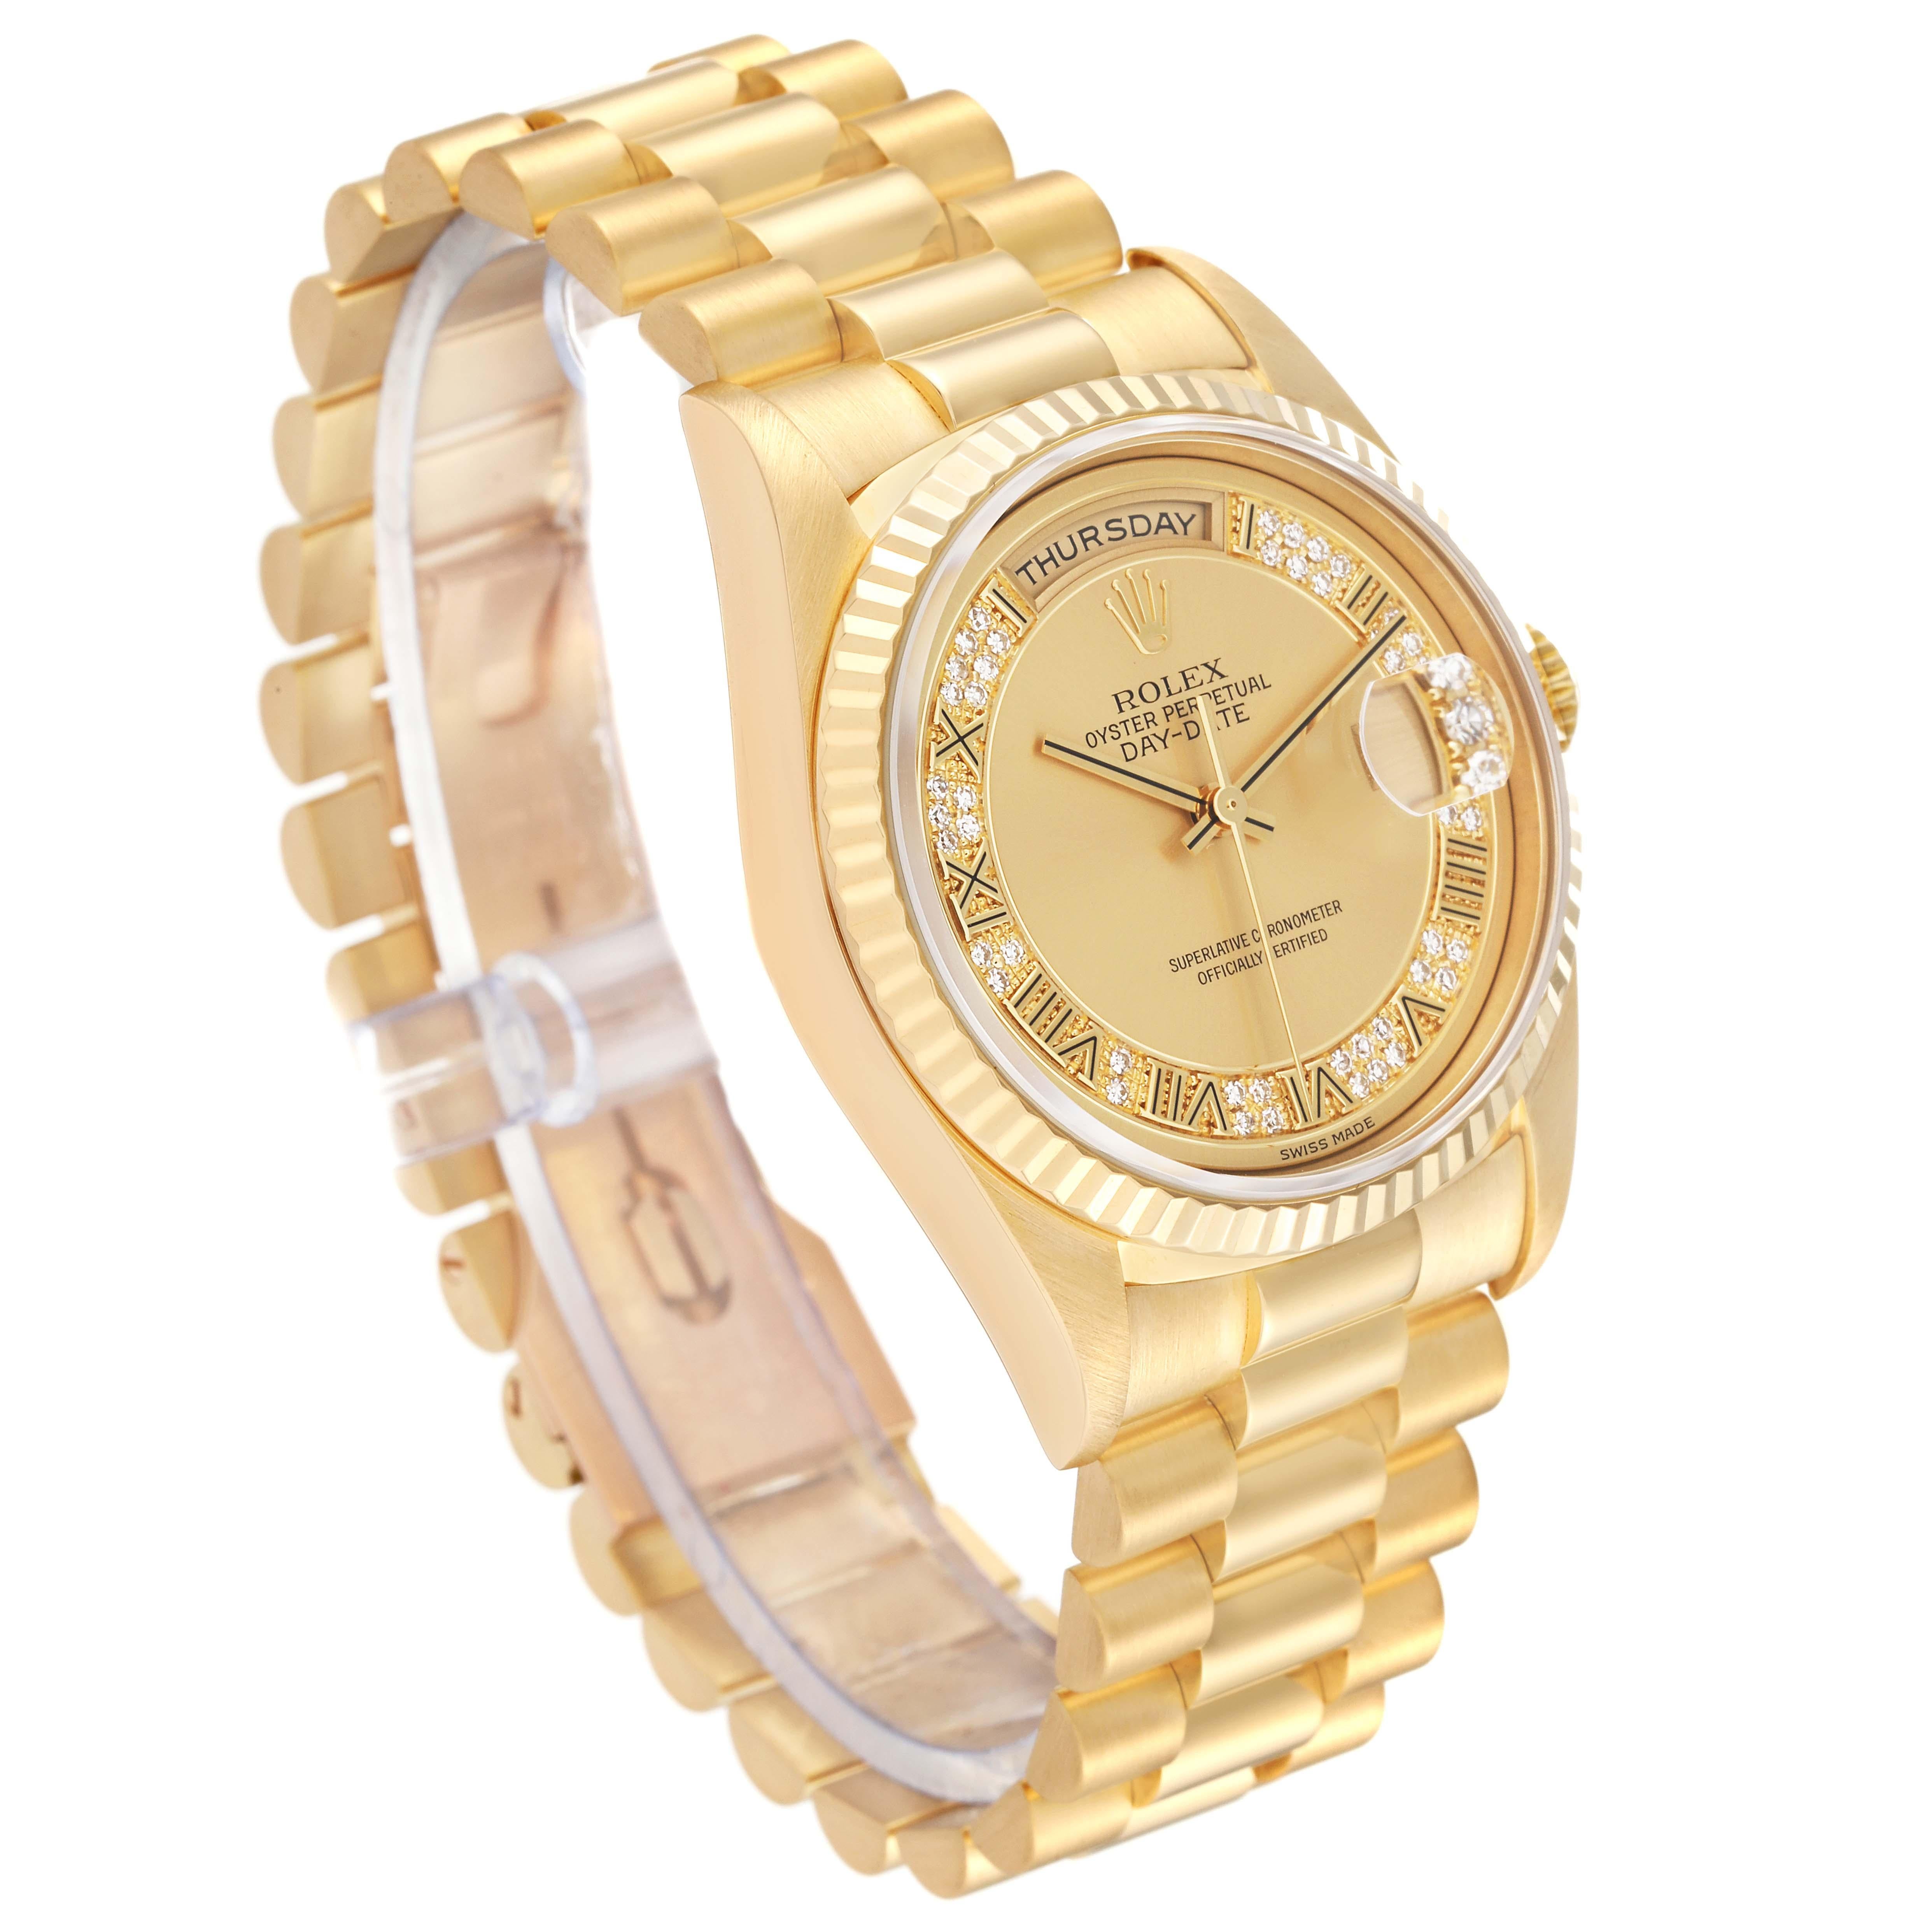 Rolex President Day-Date Yellow Gold Myriad Diamond Mens Watch 18238 In Excellent Condition For Sale In Atlanta, GA